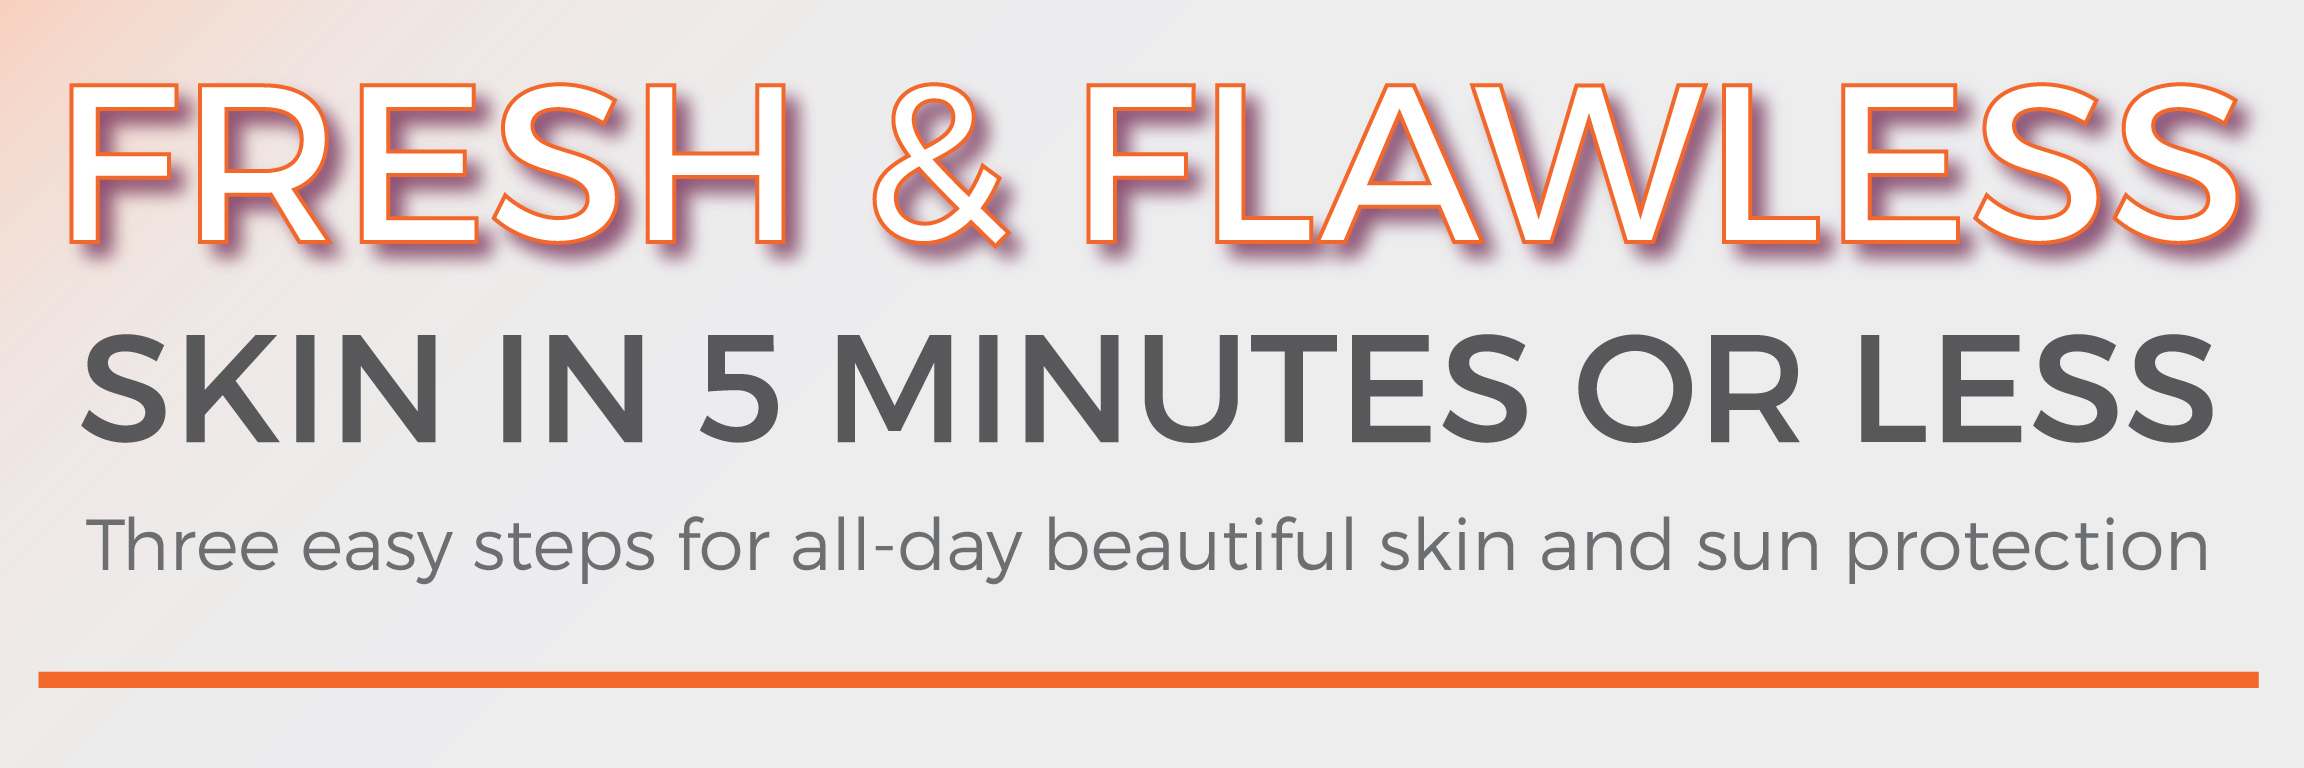 Blog - Fresh And Flawless Skin In 5 Minutes Or Less - Suntegrity Skincare